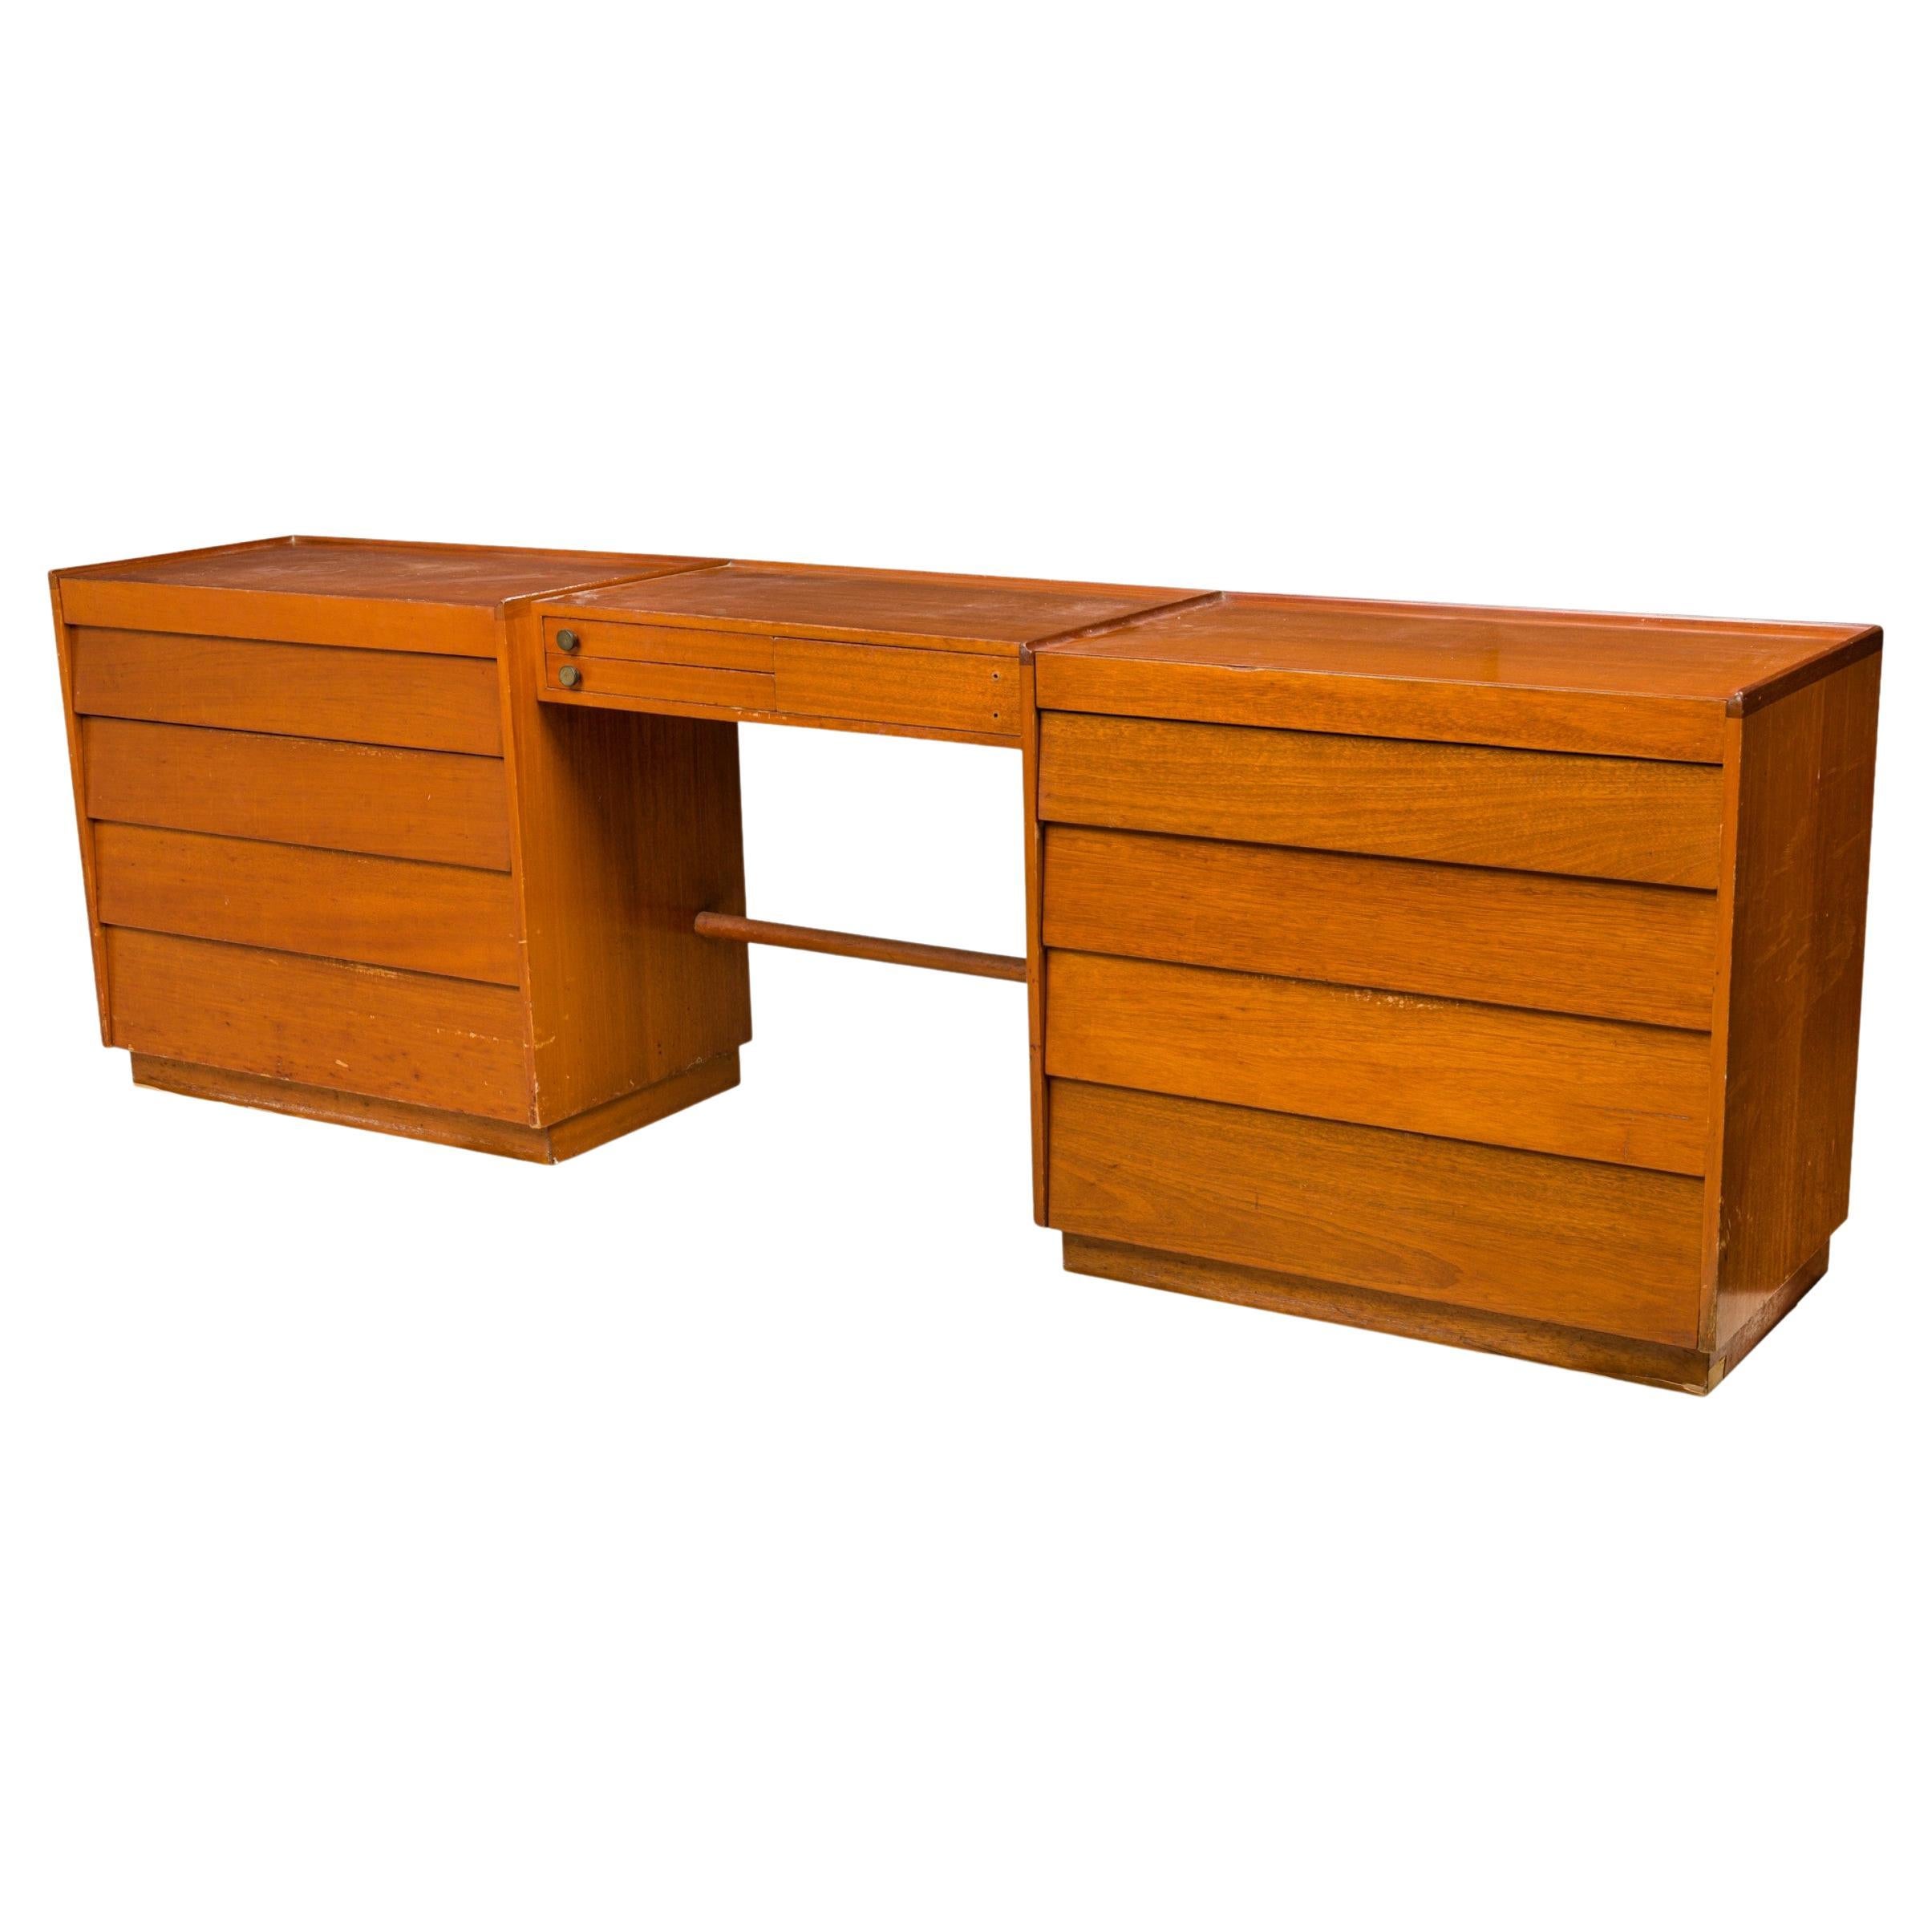 Edward Wormley for Dunbar Wooden Vanity Cabinet / Dressing Table